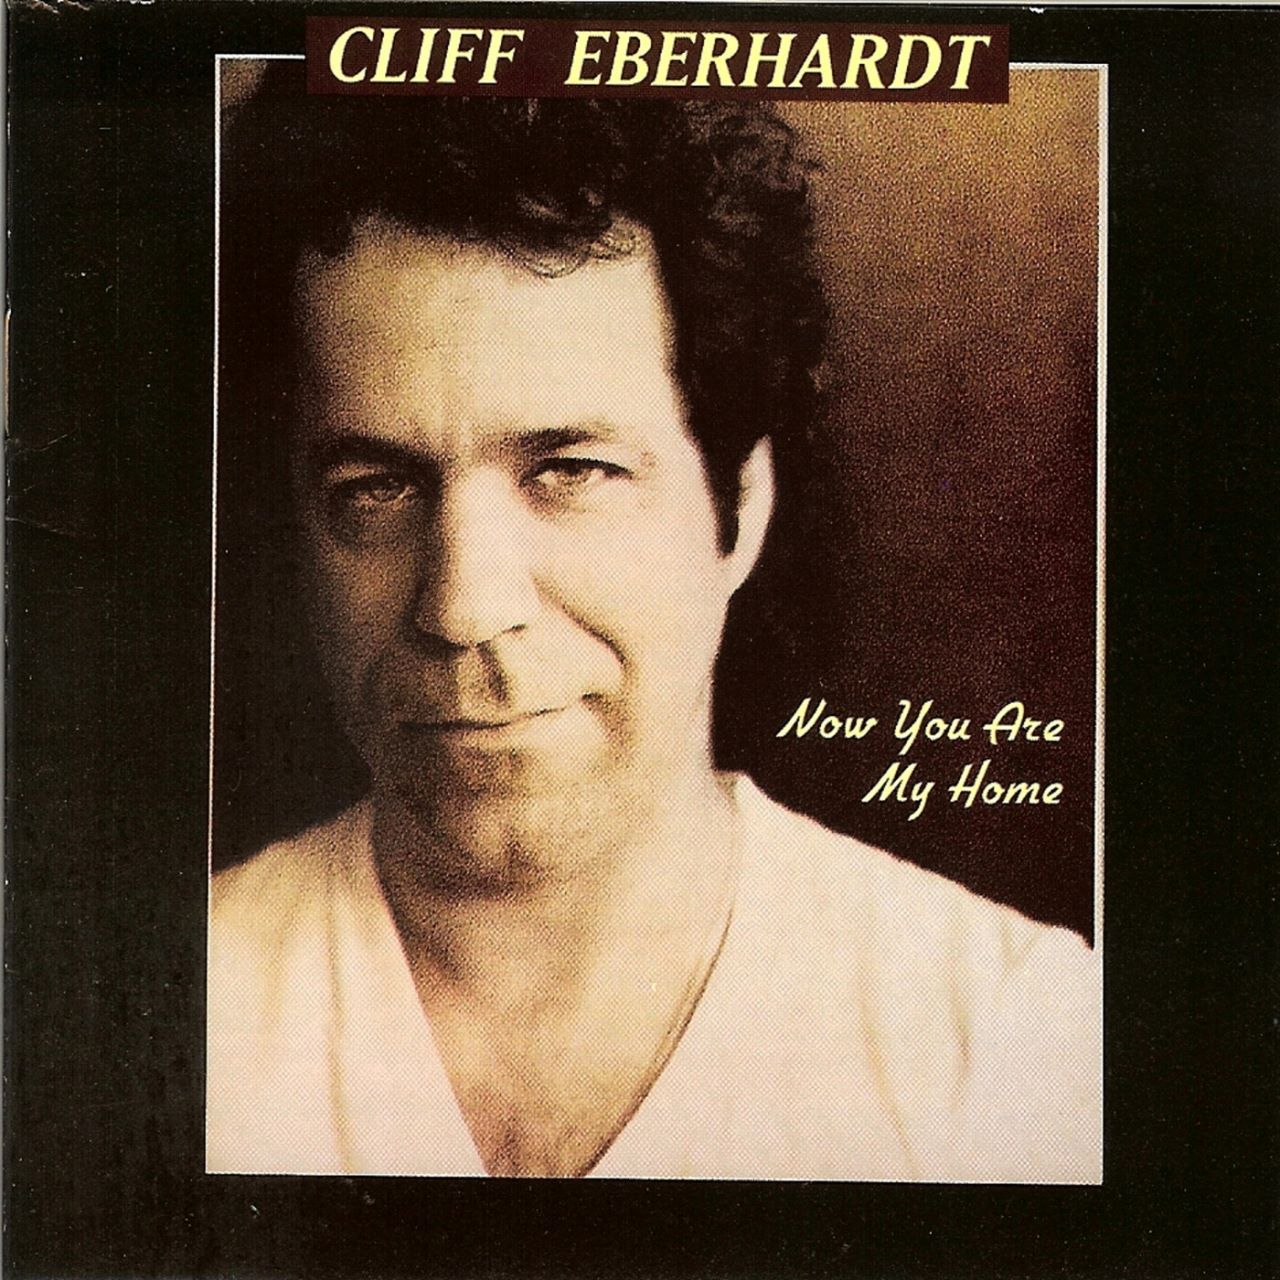 Cliff Eberhardt - Now You Are My Home cover album